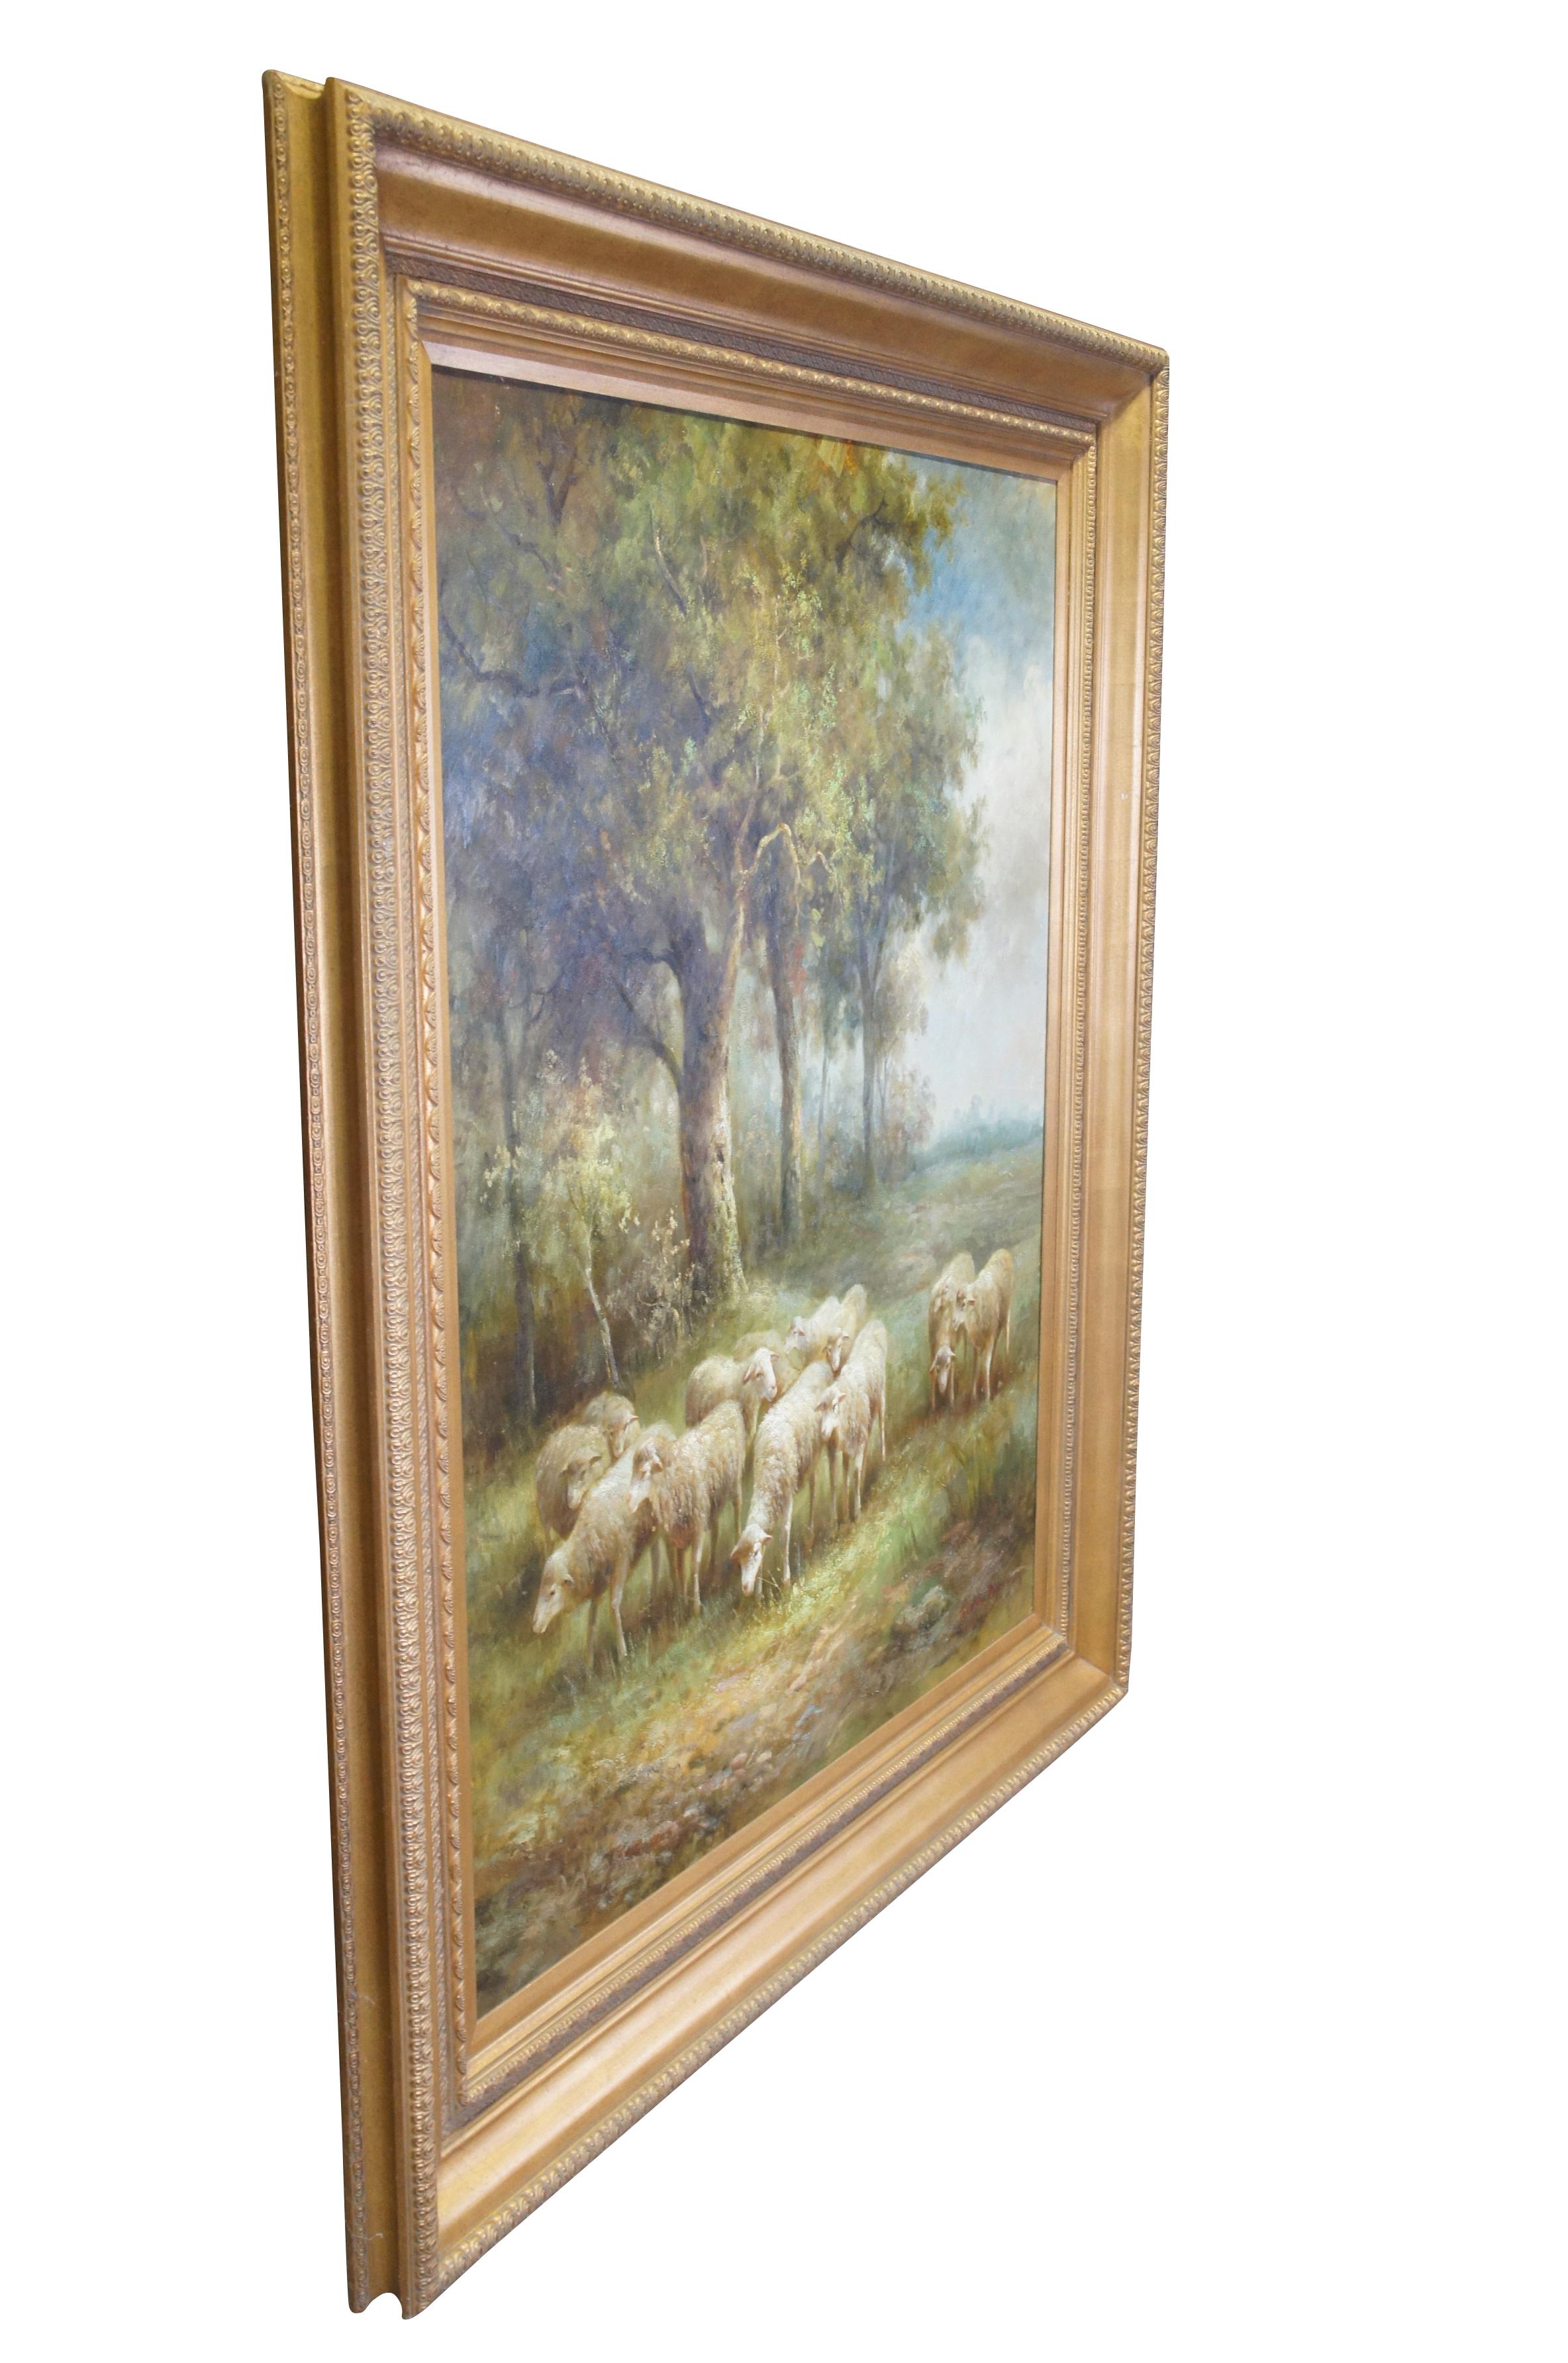 Monumental Thomas Barron Sheep Grazing Forest Landscape Oil Painting 75